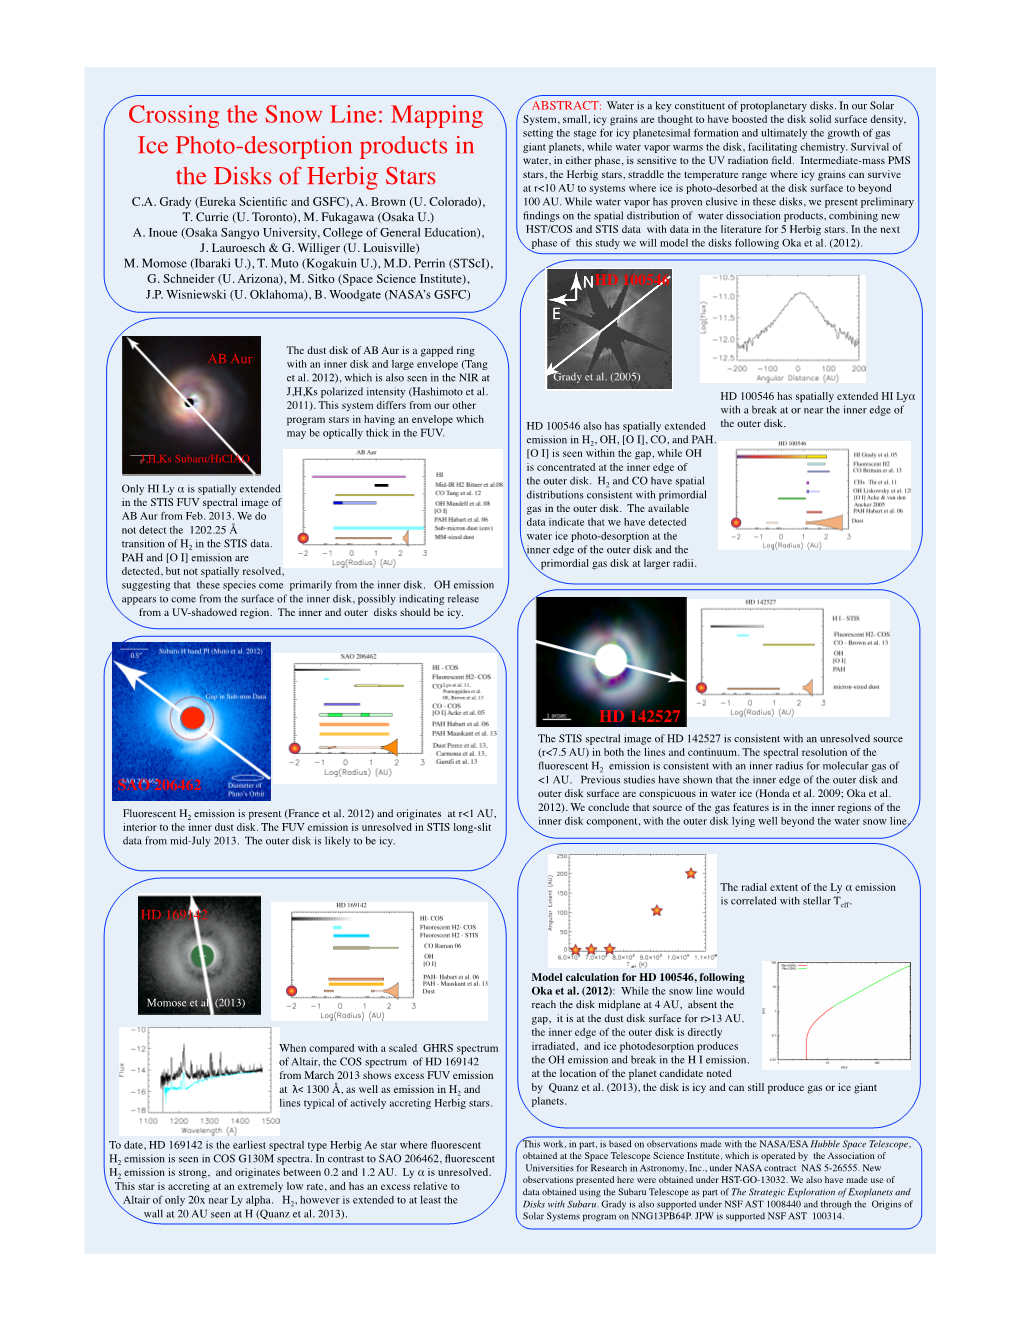 Mapping Ice Photo-Desorption Products in the Disks of Herbig Stars